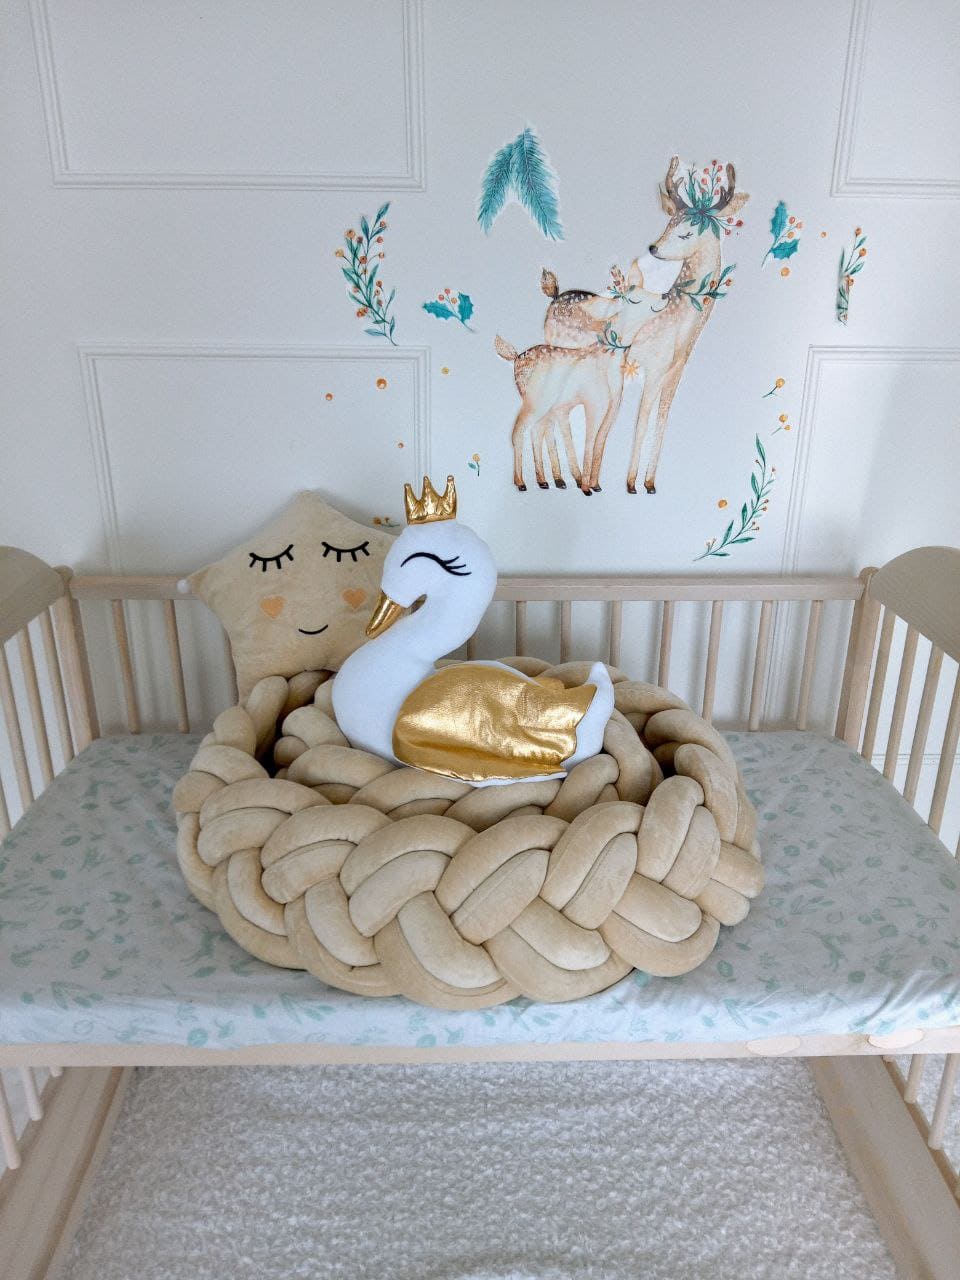 Vanilla star pillow and white swan pillow on top of the vanilla braided crib bumper. Front side